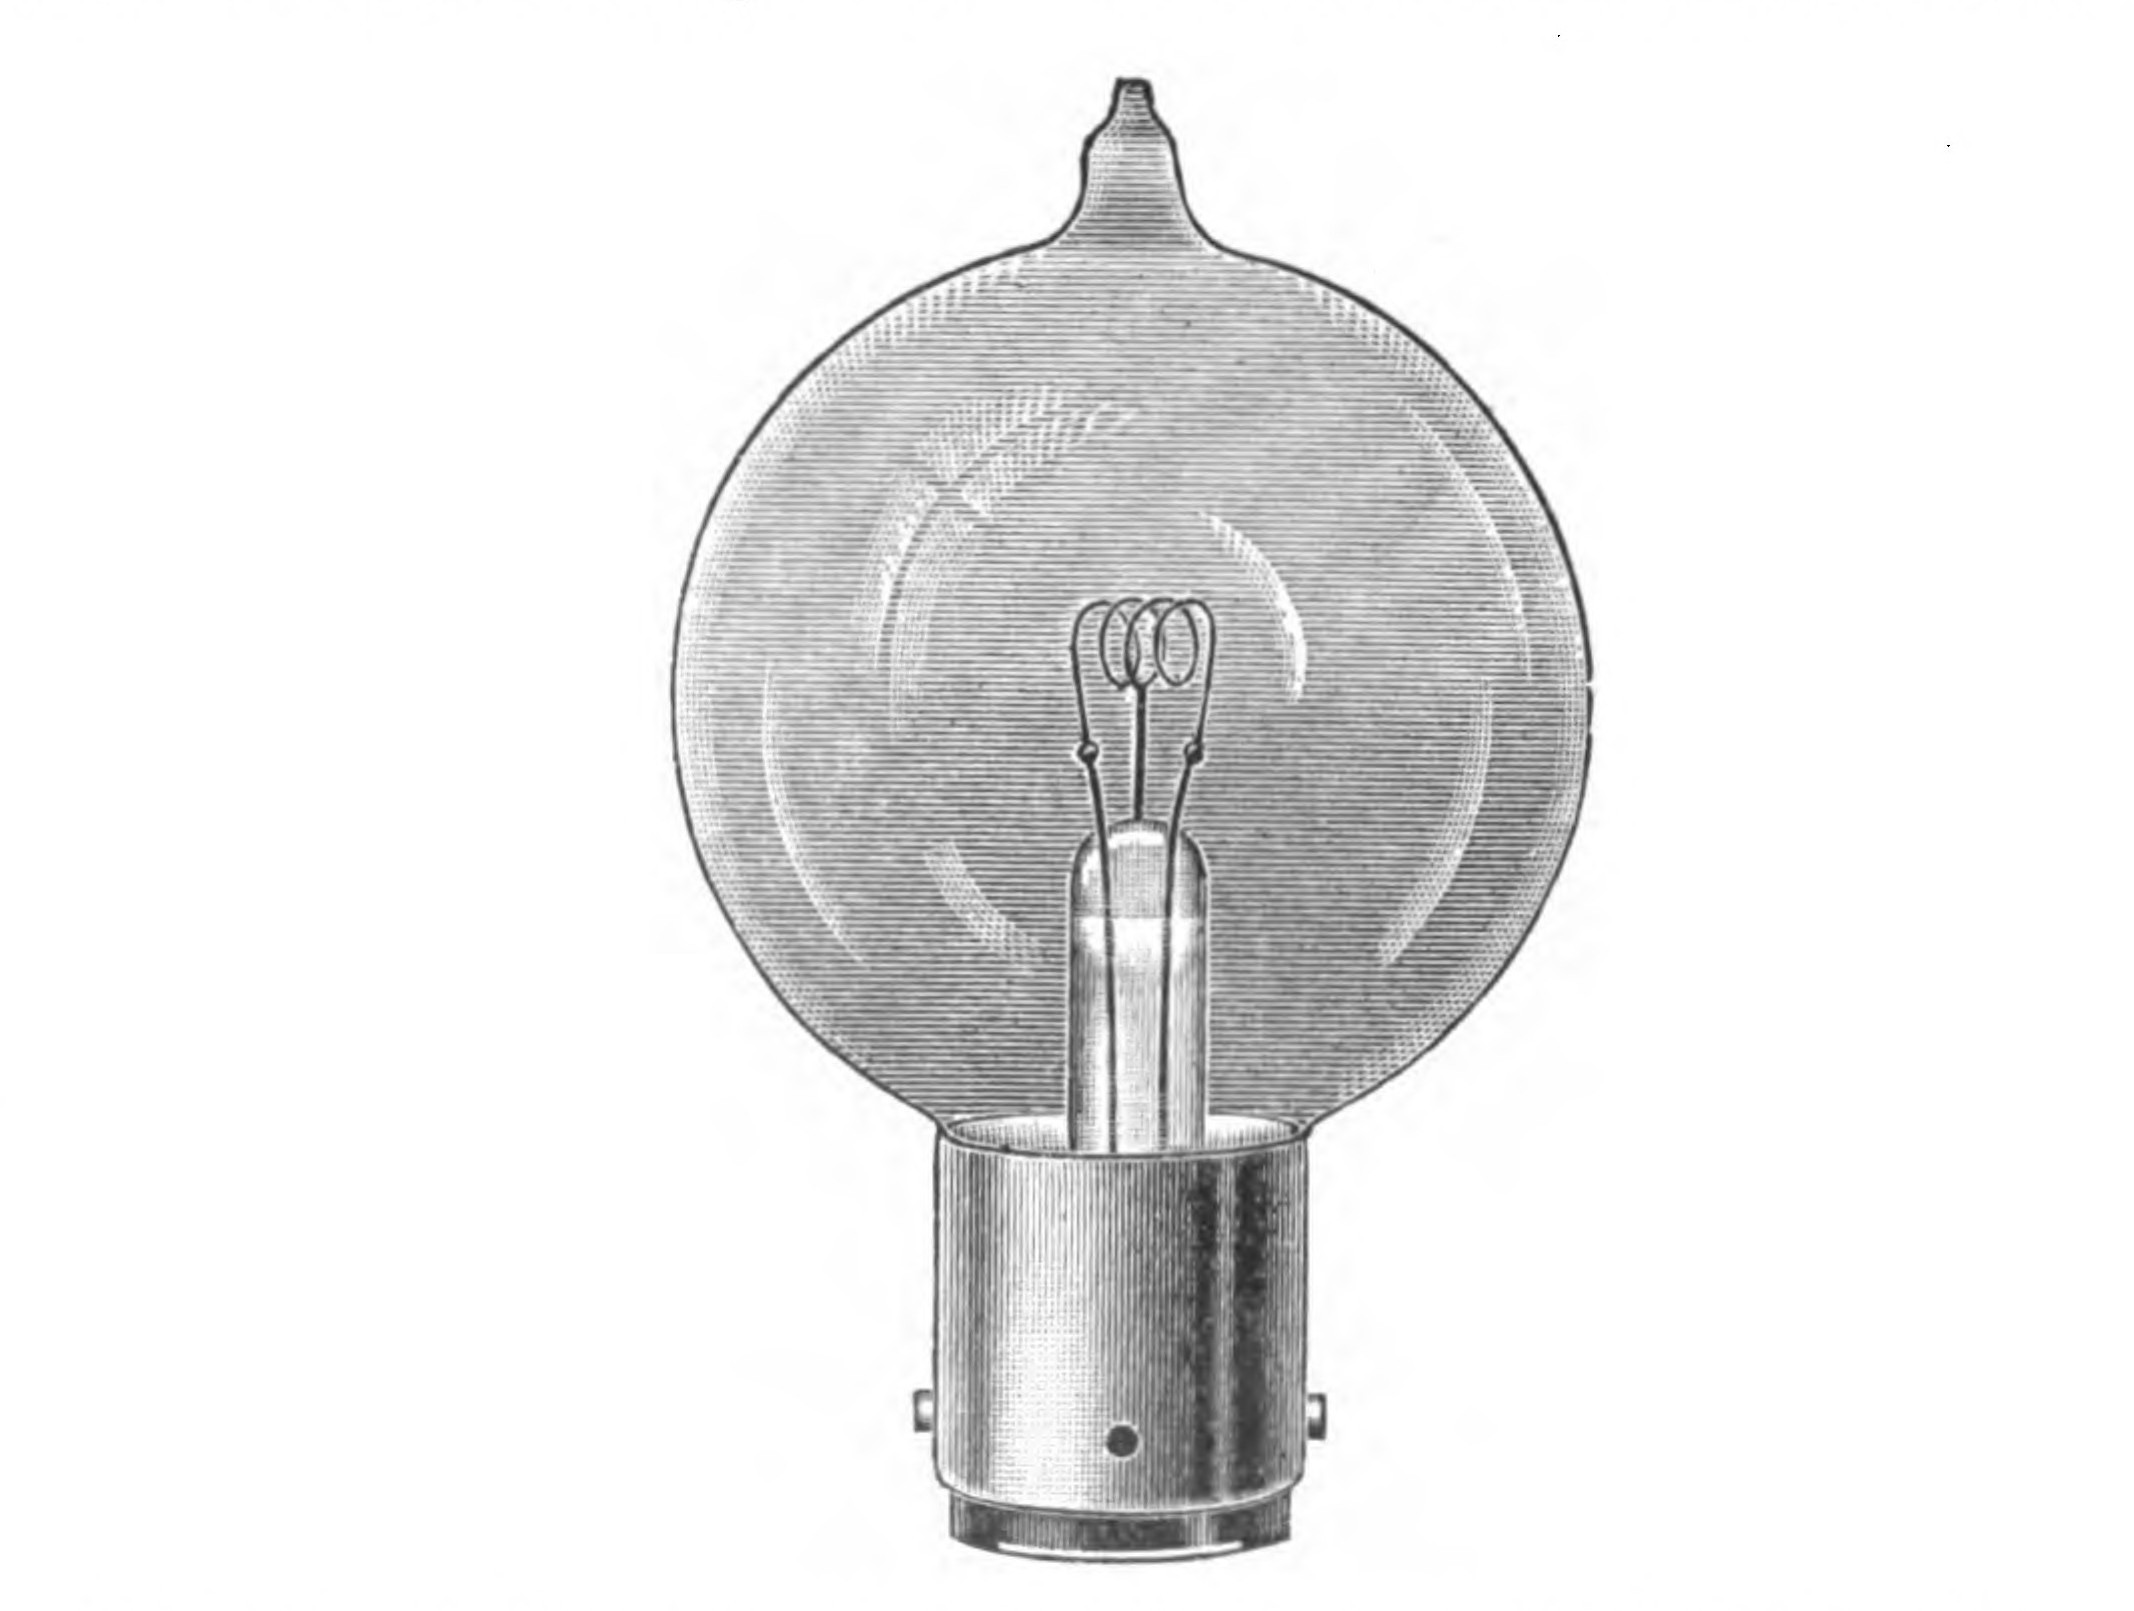 FIG. 158.—A Tungsten Automobile Lamp with Ediswan Base.